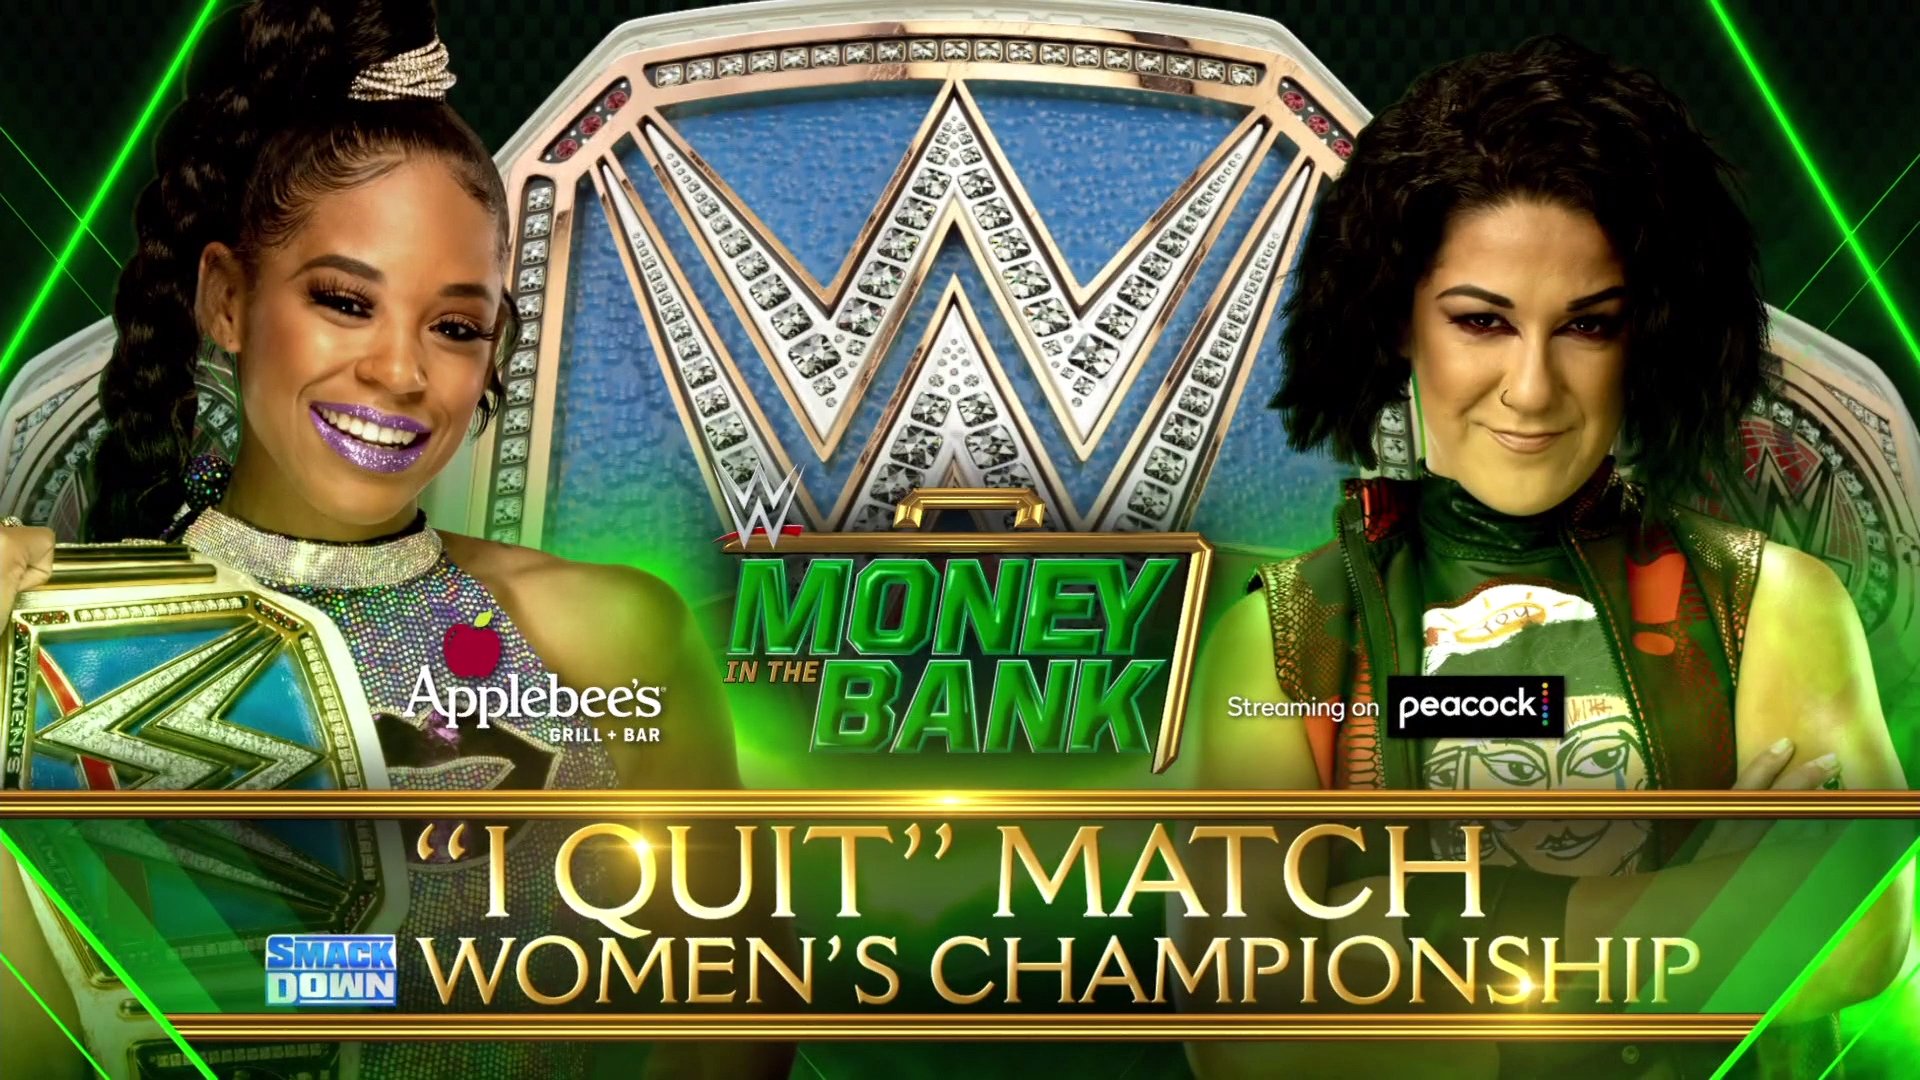 WWE Money in The Bank: Bayley vs Bianca Belair added to the PPV event